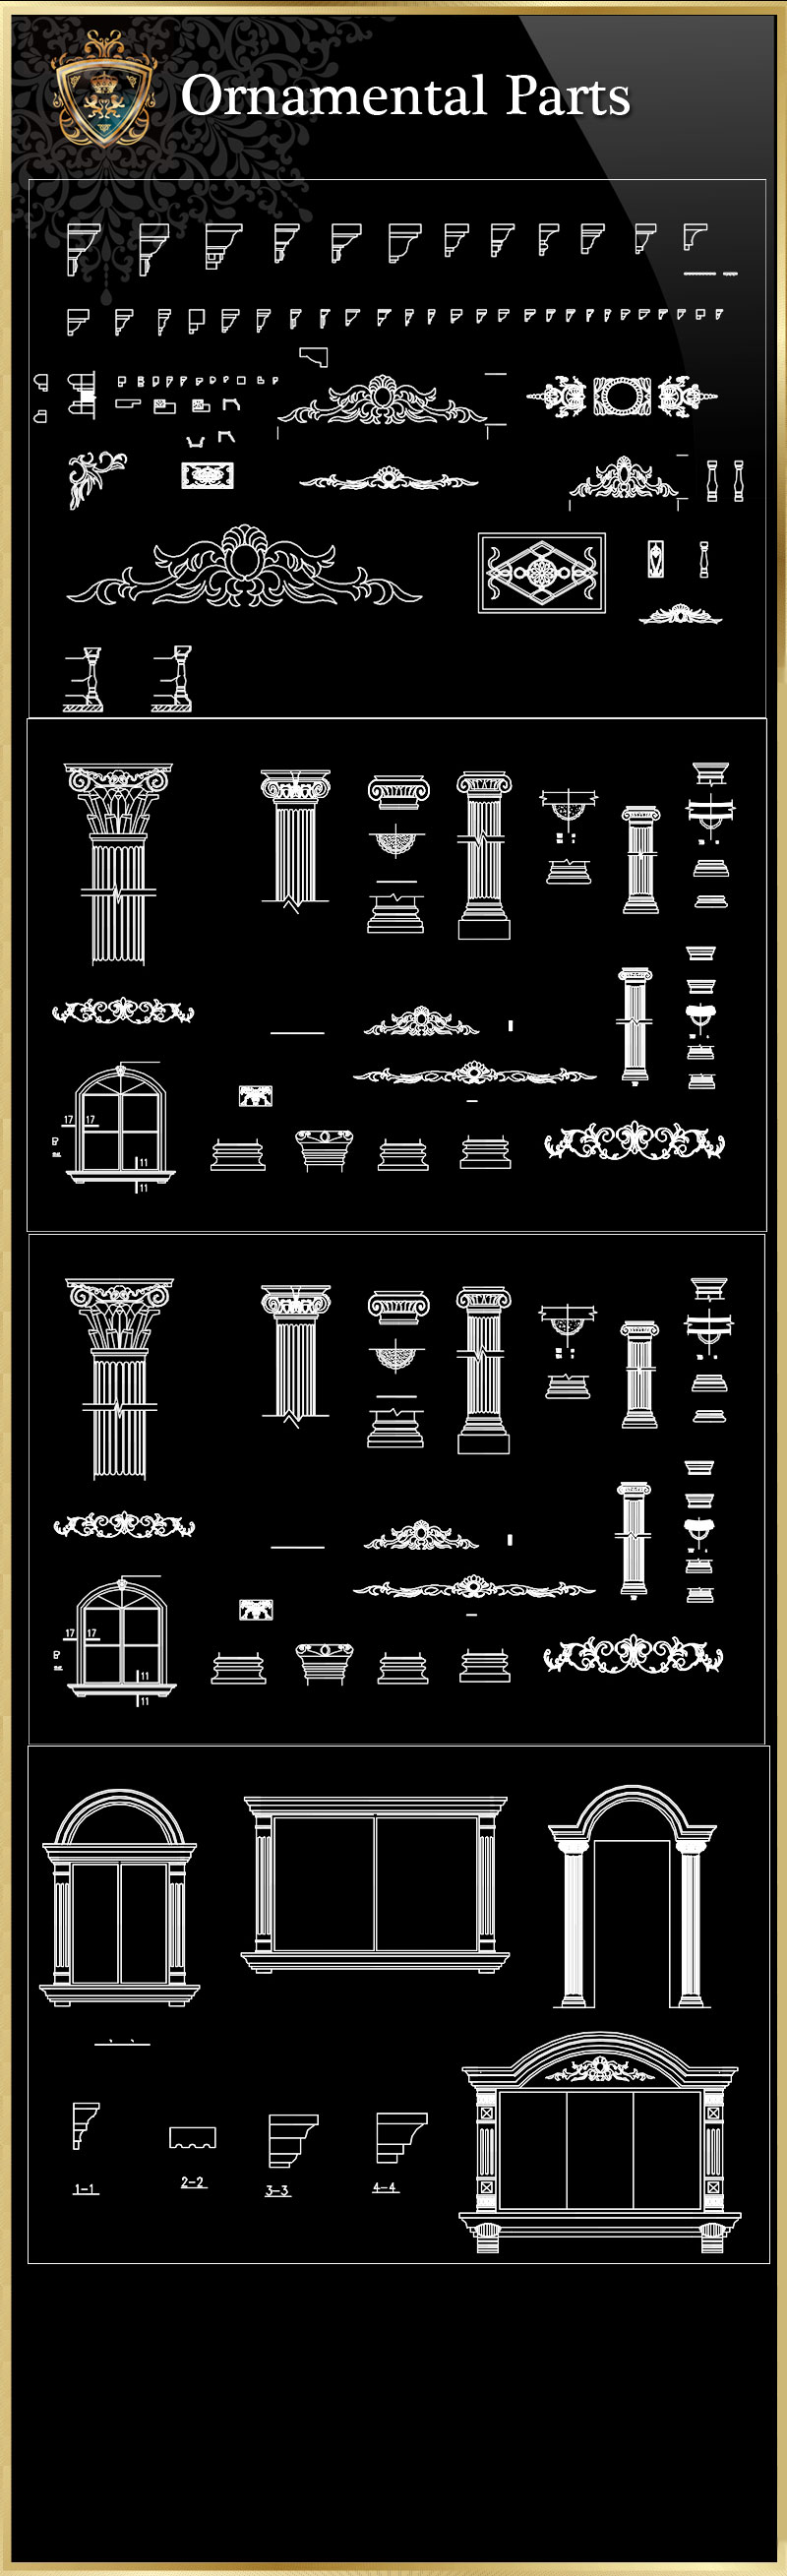 ★【Ornamental Parts of Buildings 8】Download Luxury Architectural Design CAD Drawings--Over 20000+ High quality CAD Blocks and Drawings Download!